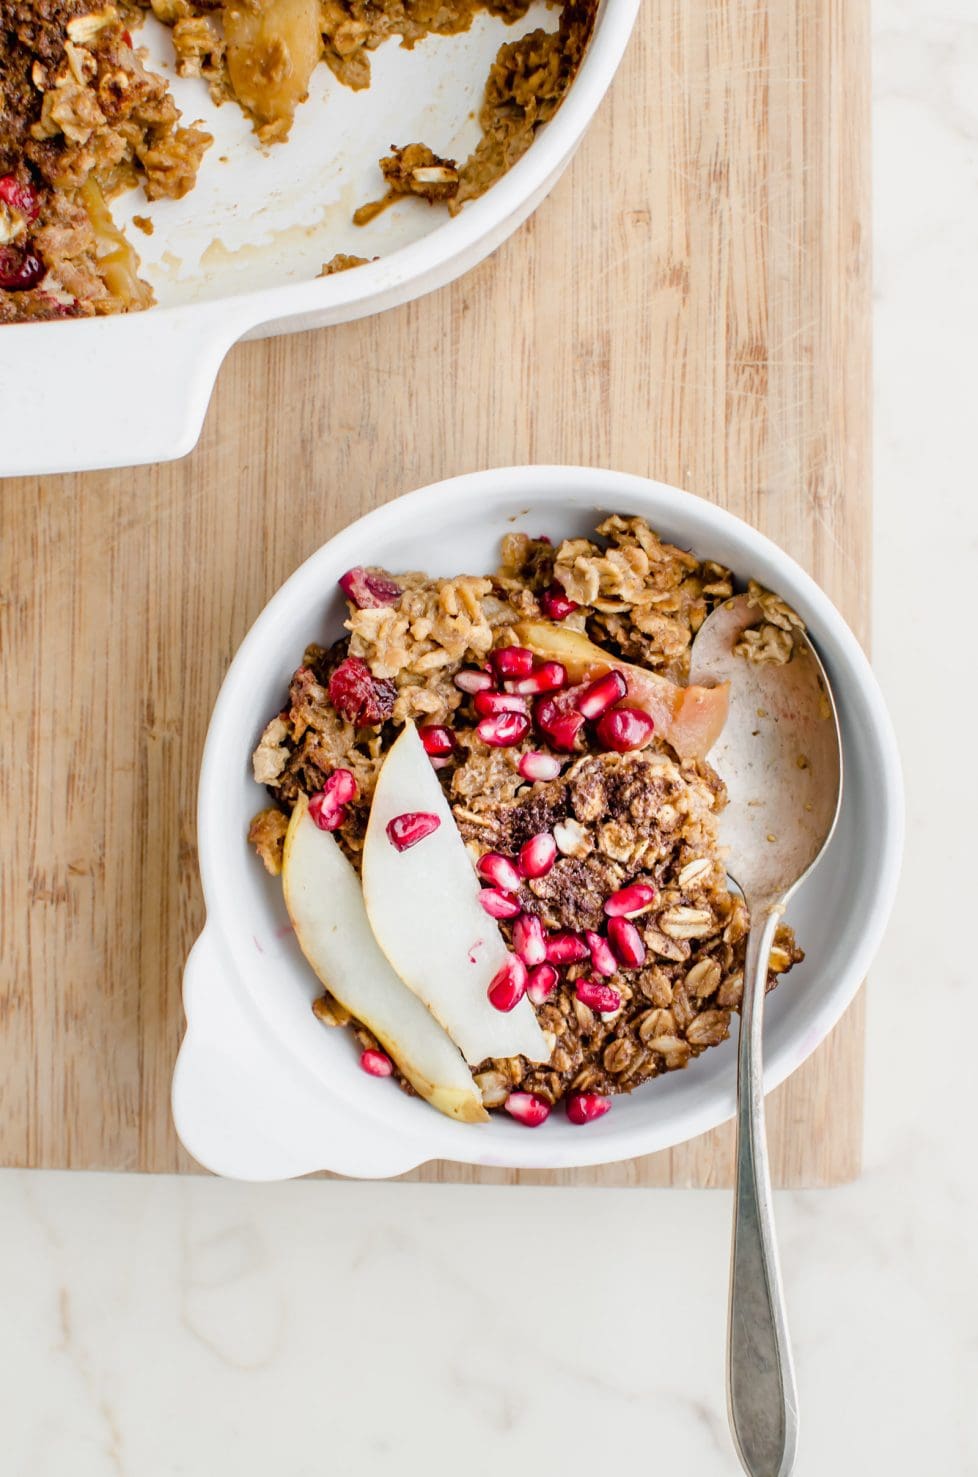 Gingerbread Baked Oatmeal with Pears and Cranberries gluten-free